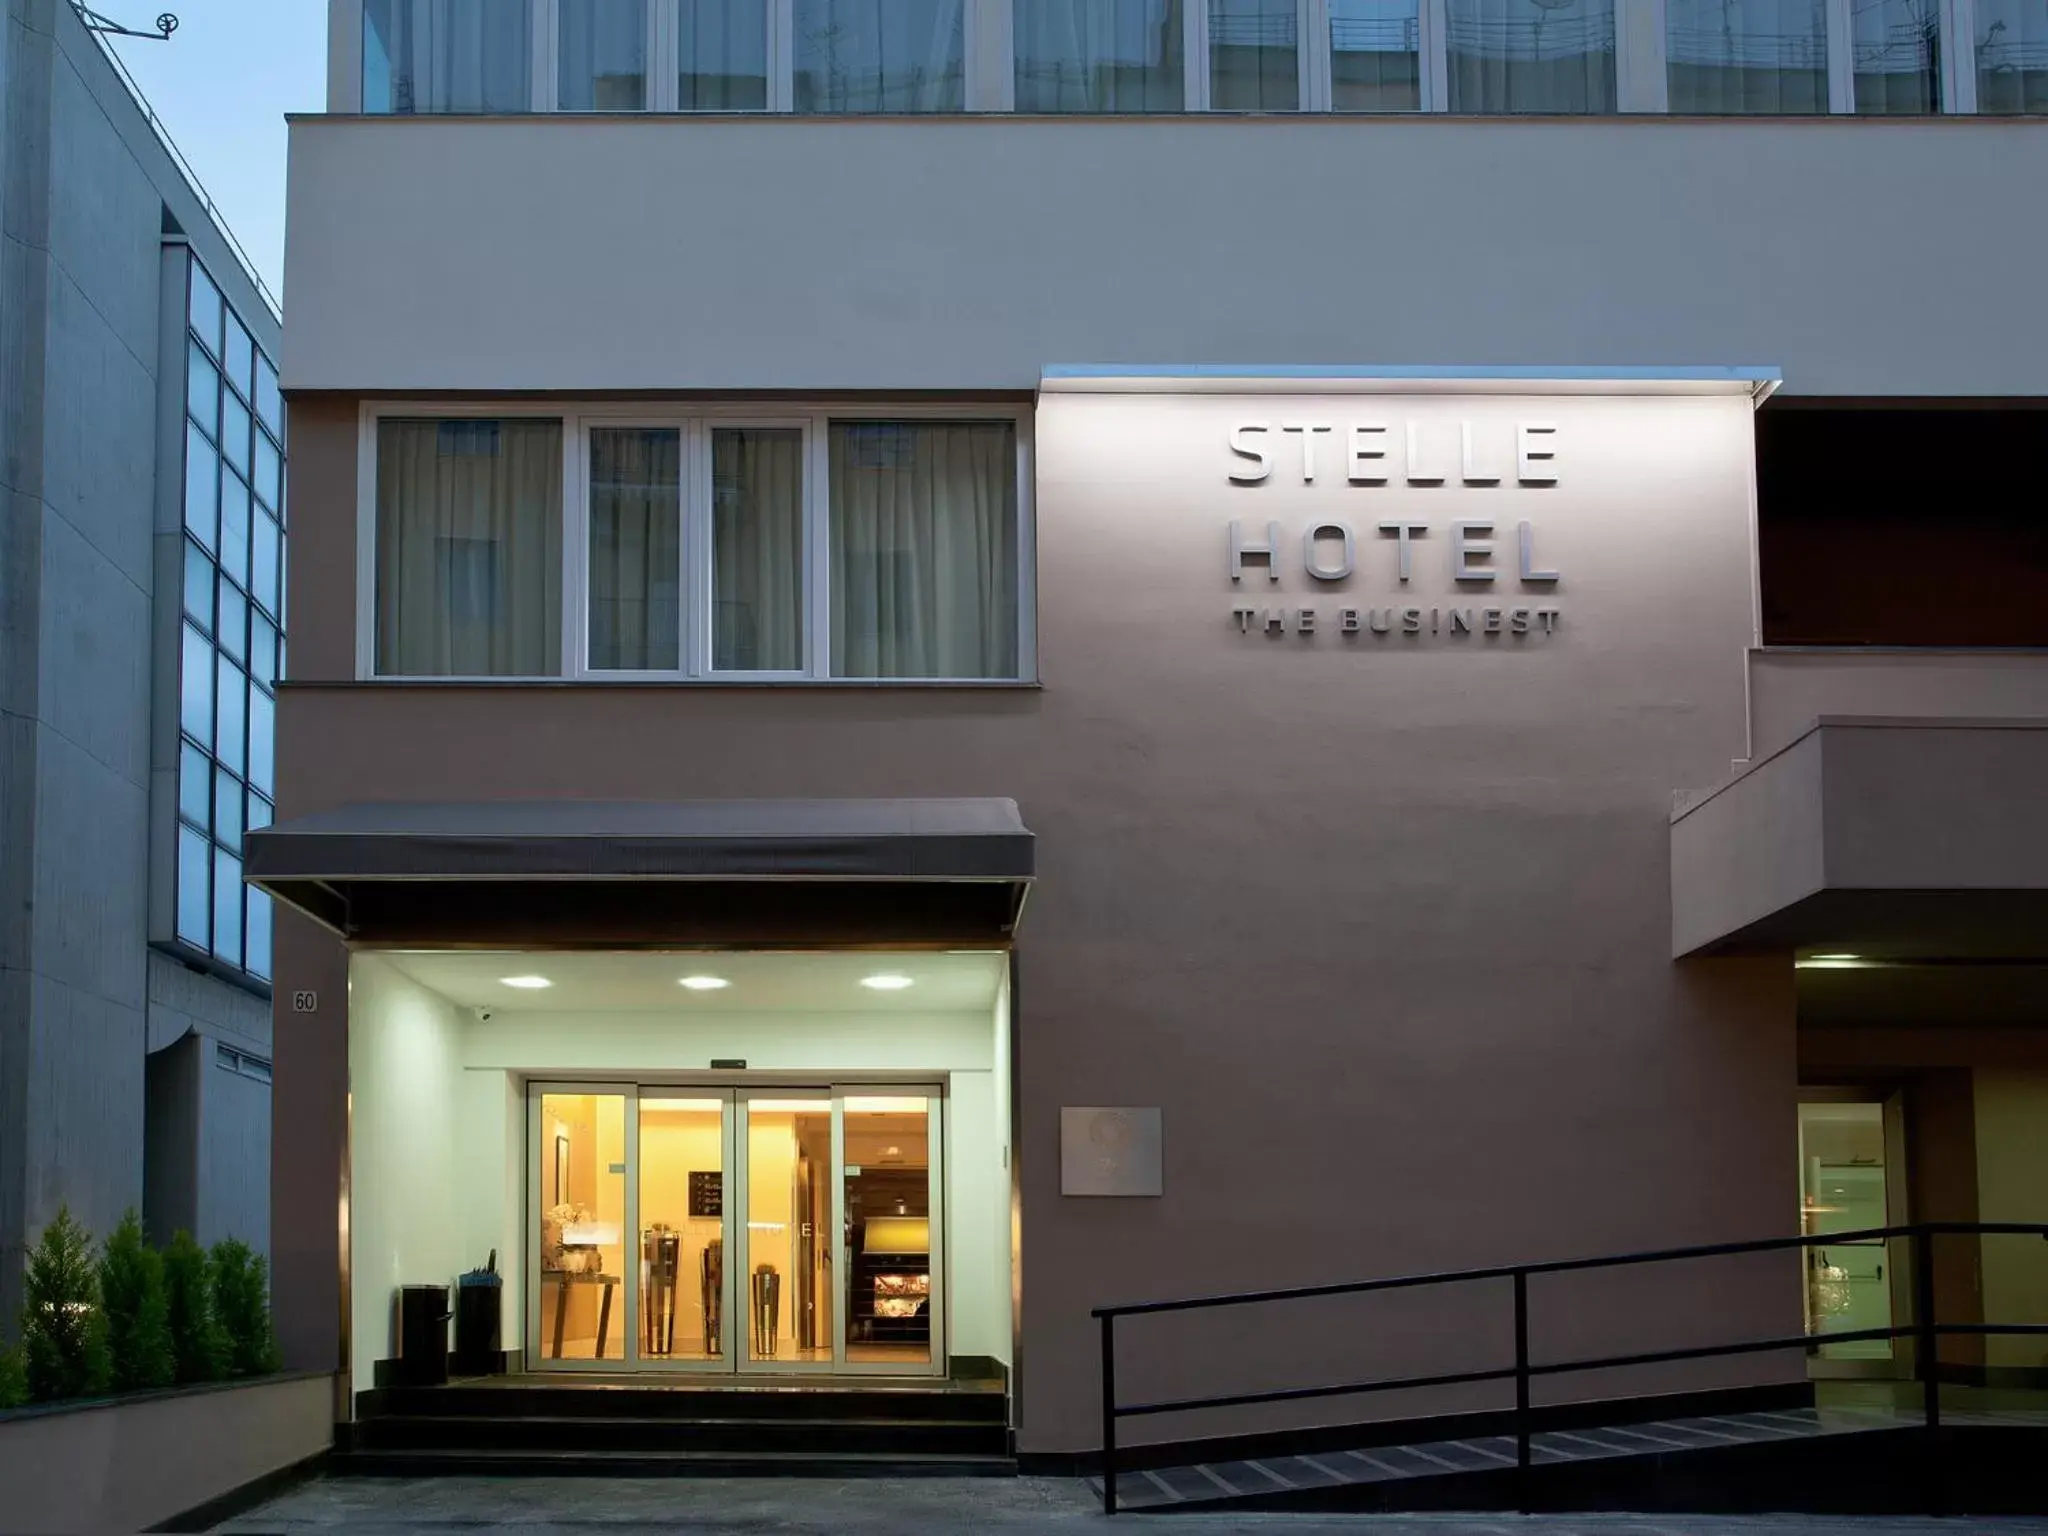 Facade/entrance in Stelle Hotel The Businest